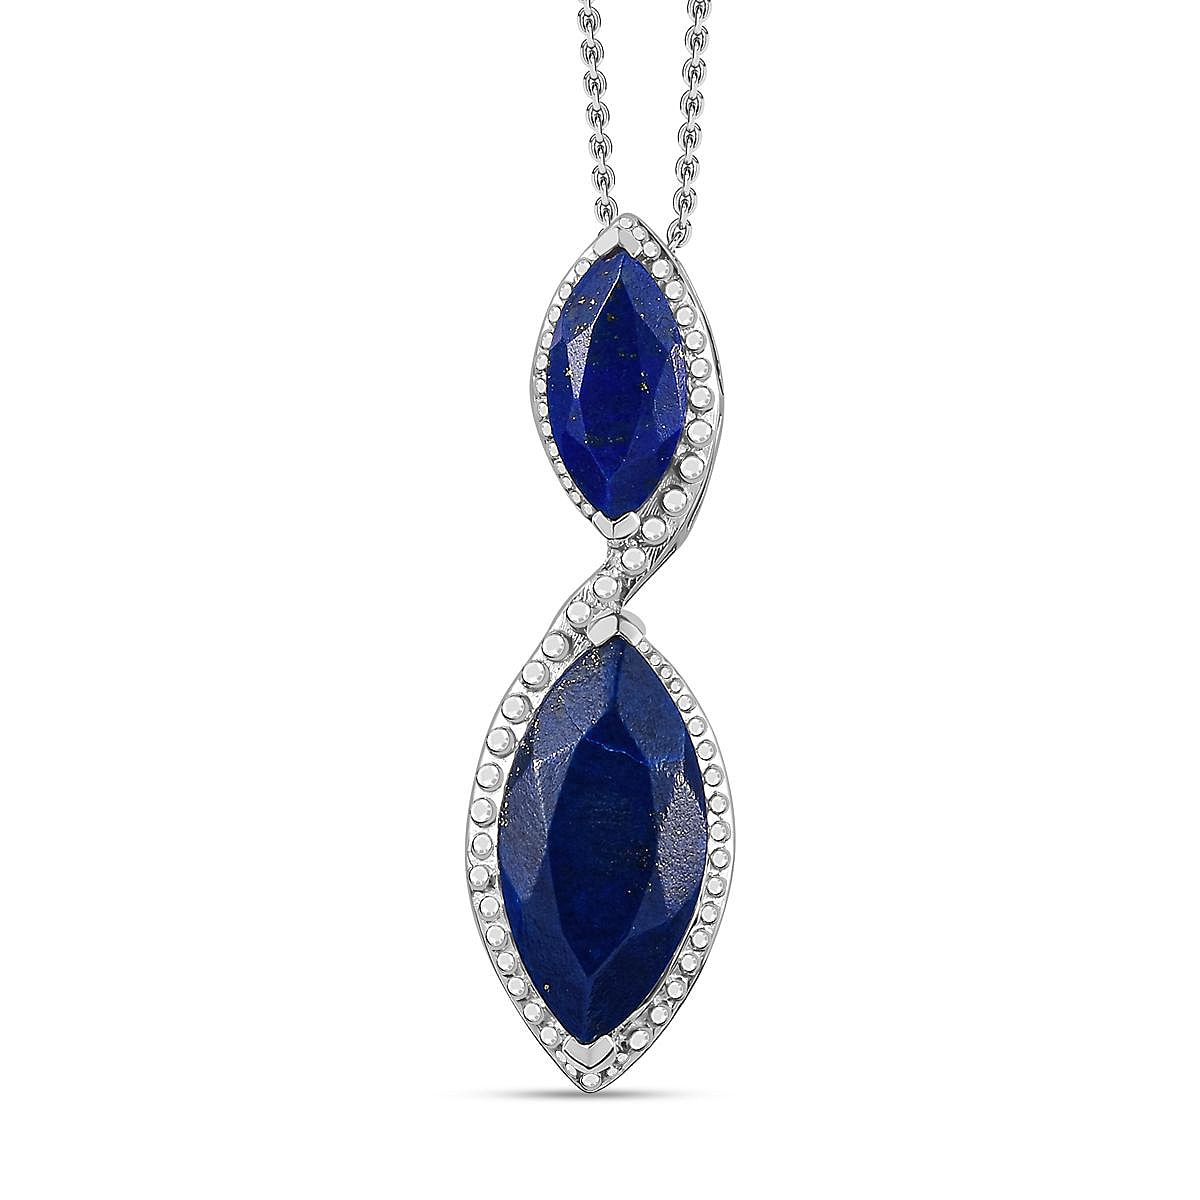 Lapis Lazuli Dangle Pendant with Chain (Size 20) in Platinum Overlay Sterling Silver 8.75 Ct, Silver Wt. 8.32 Gms